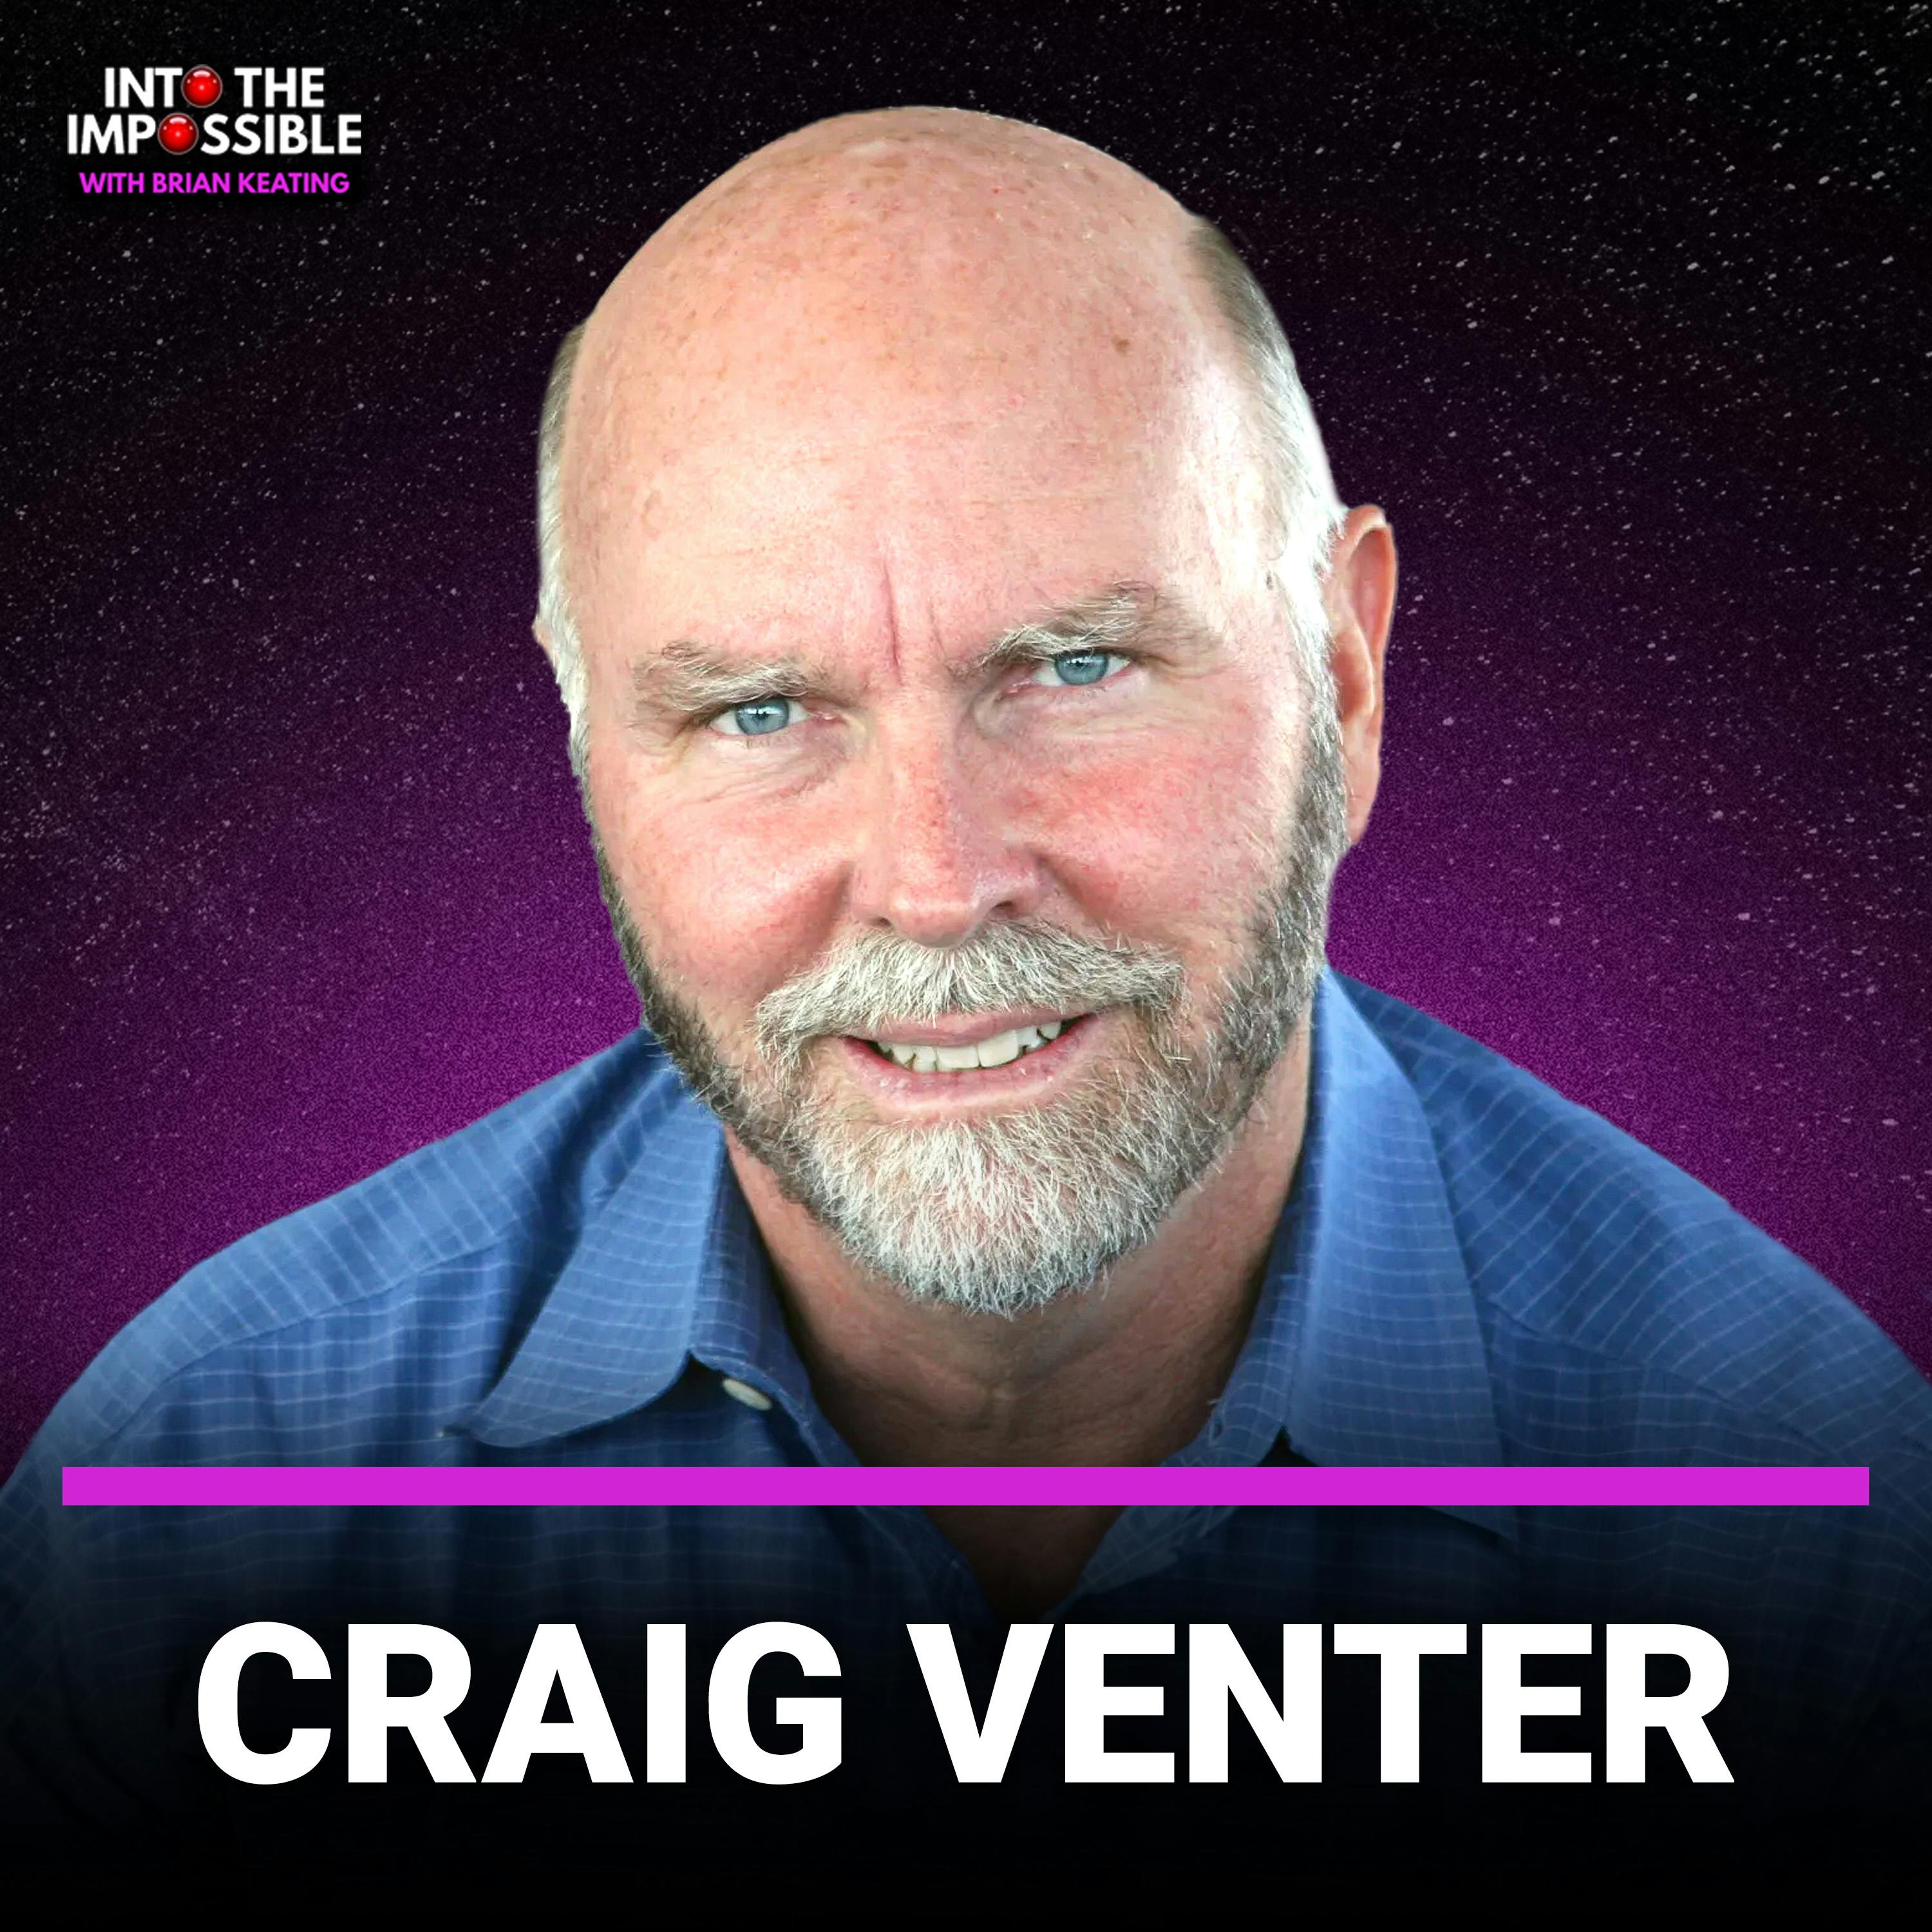 Engineering Synthetic Life With Craig Venter (#385)